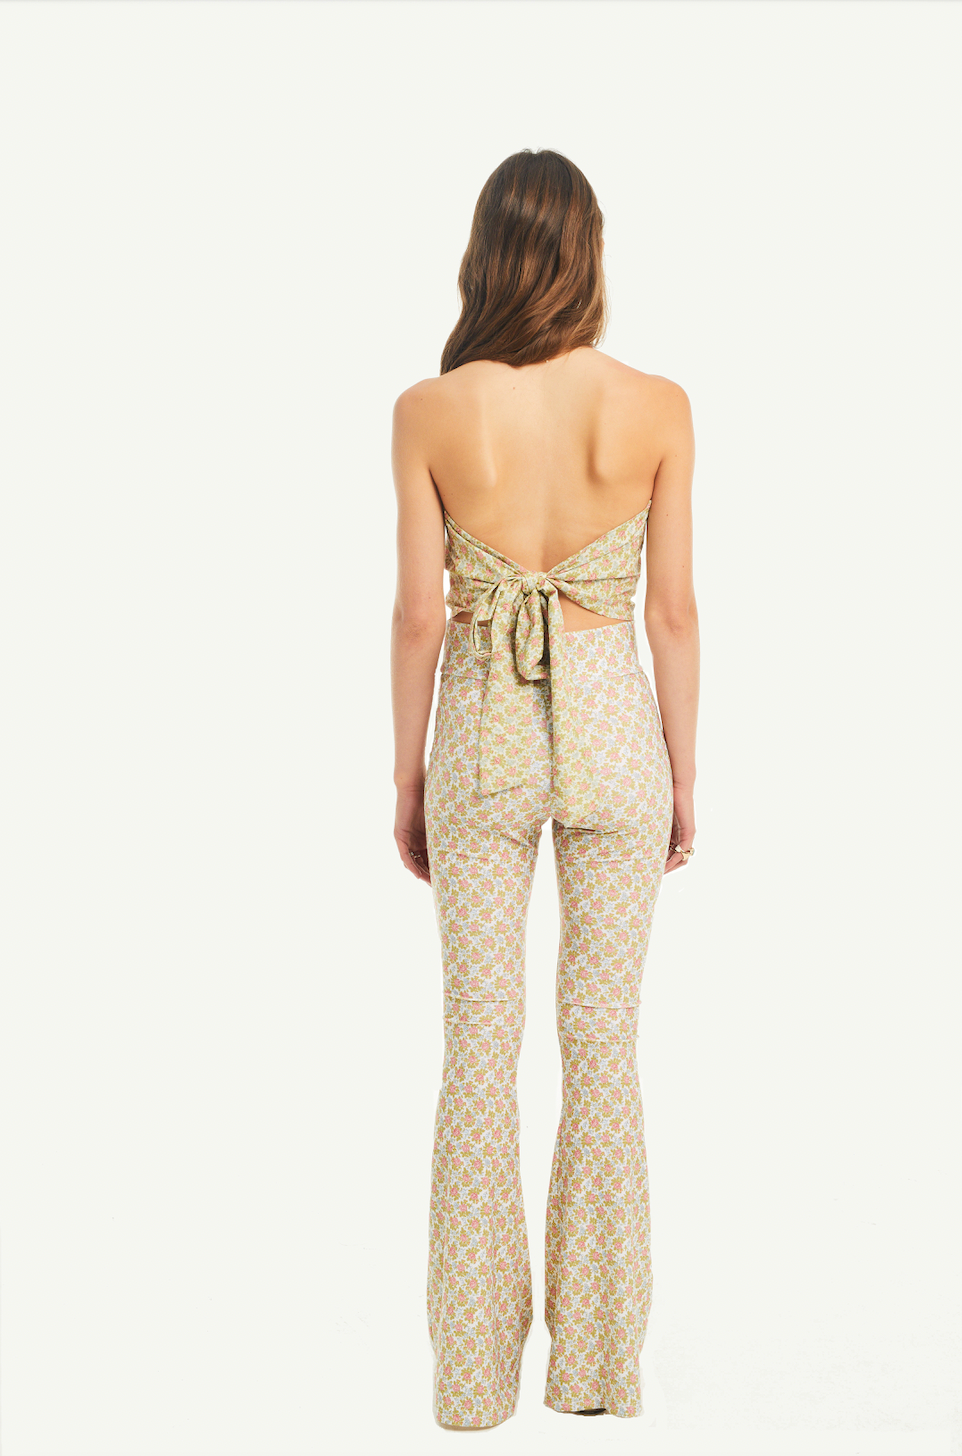 LOLA - flared pants in Dumbaron patterned lycra